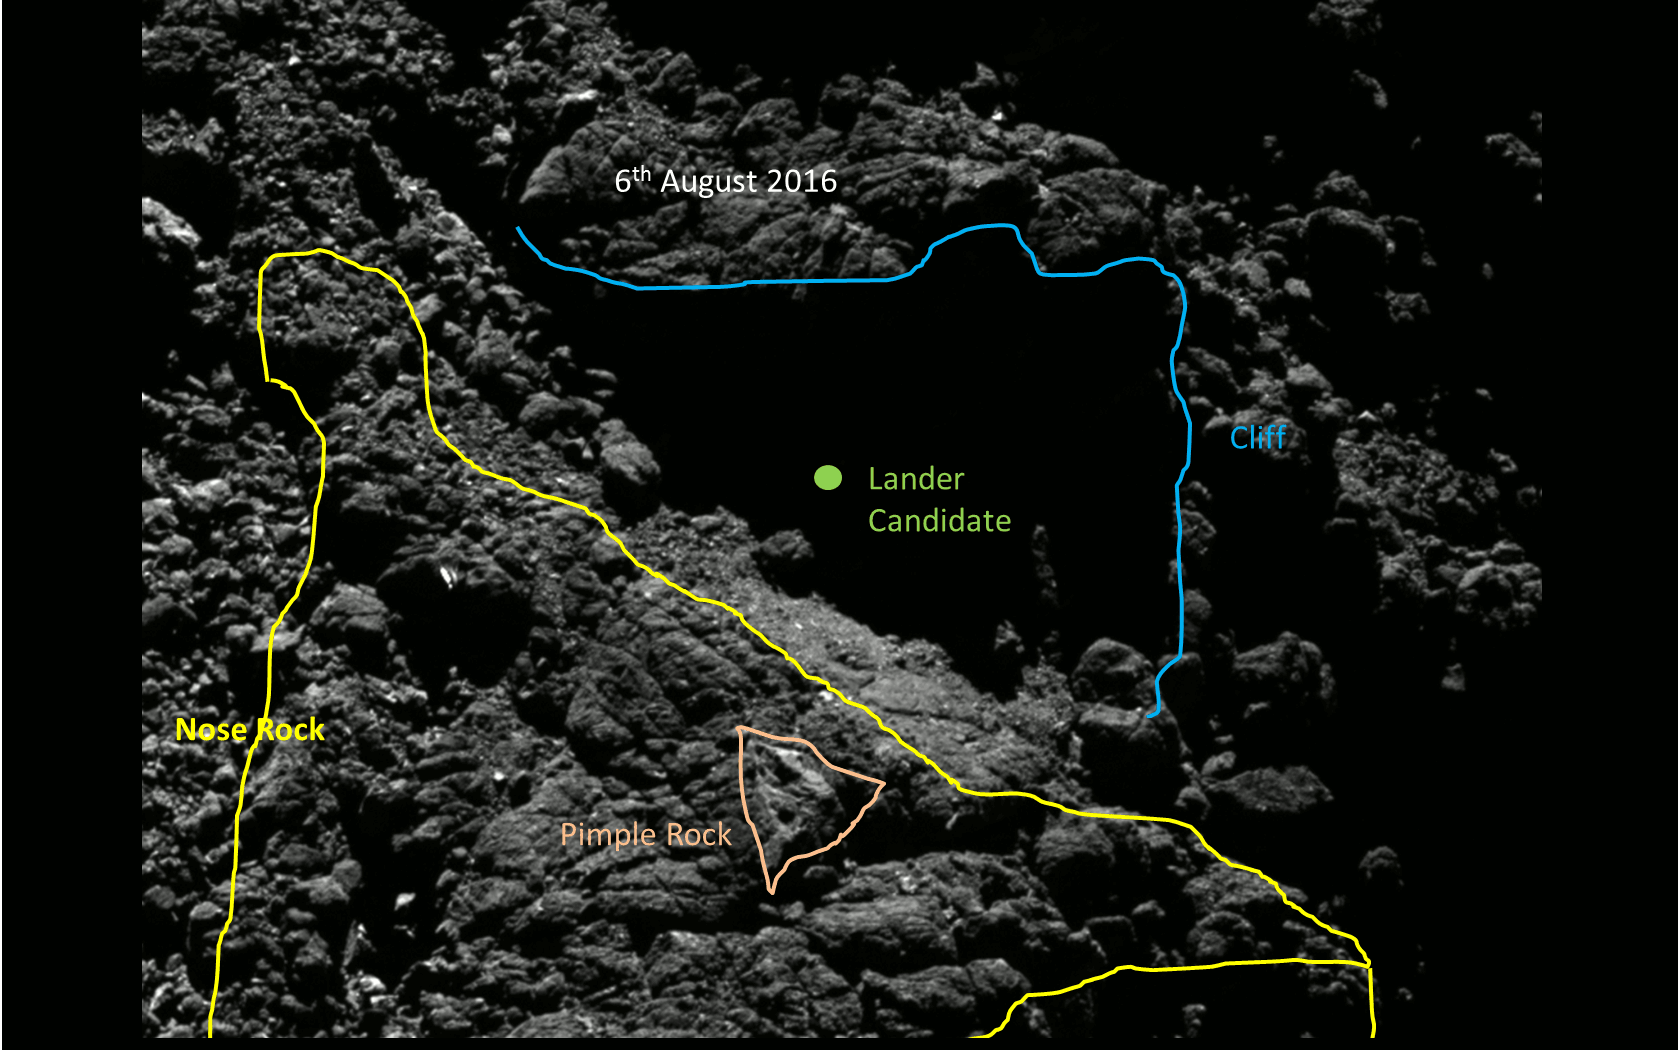 Images taken on 6 August 2016 shown with key landscape features labelled and the lander candidate circled. 3D view of Philae included at same time for comparison purposes. Credits: Images: ESA/Rosetta/MPS for OSIRIS Team MPS/UPD/LAM/IAA/SSO/INTA/UPM/DASP/IDA; 3D Philae shape: CNES/ A.Charpentier; Lander search analysis: L. O’Rourke 